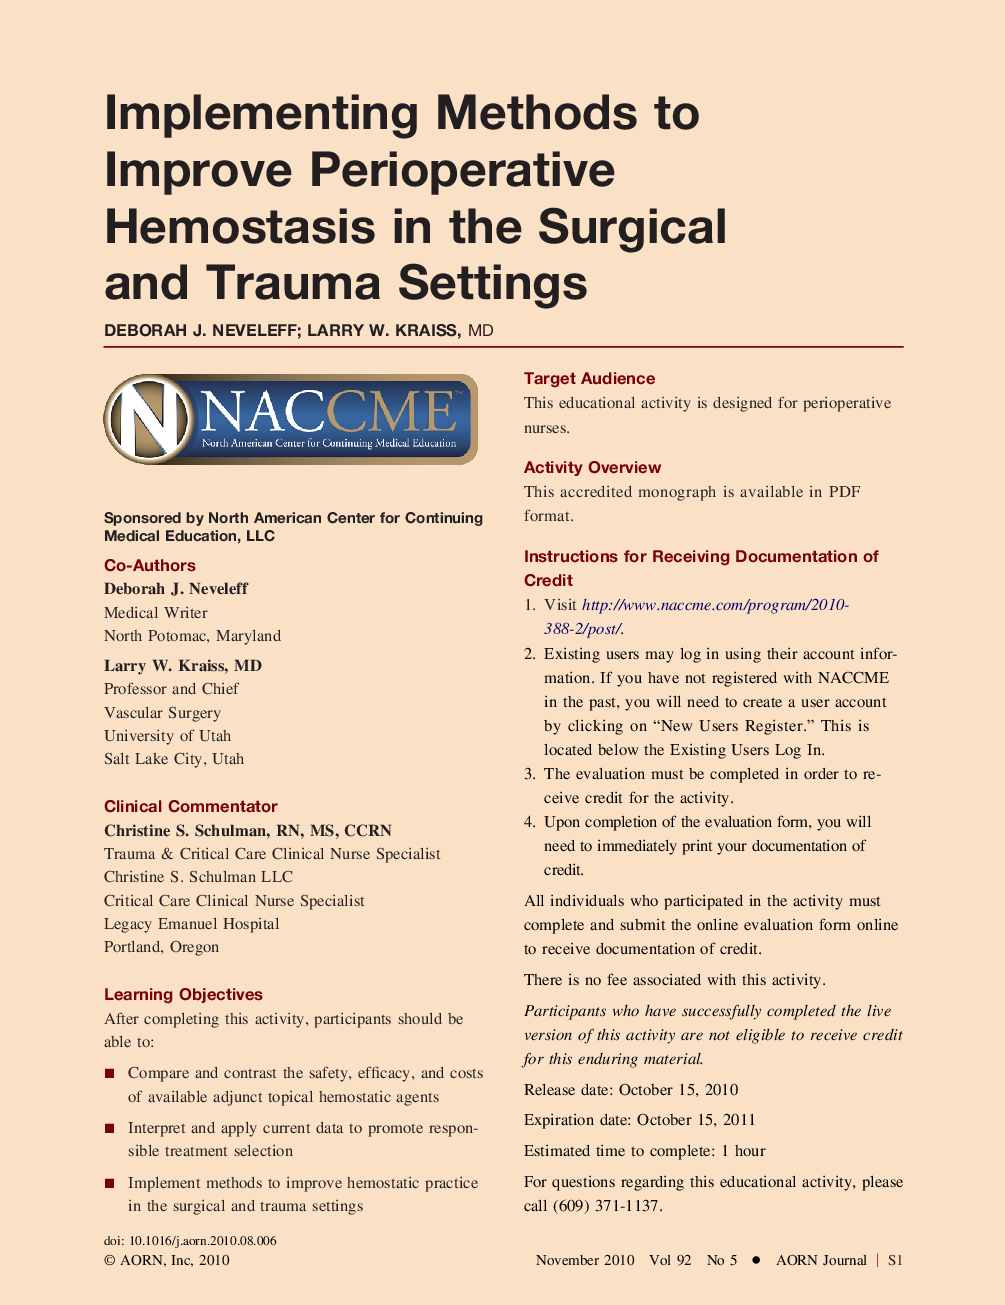 Implementing Methods to Improve Perioperative Hemostasis in the Surgical and Trauma Settings